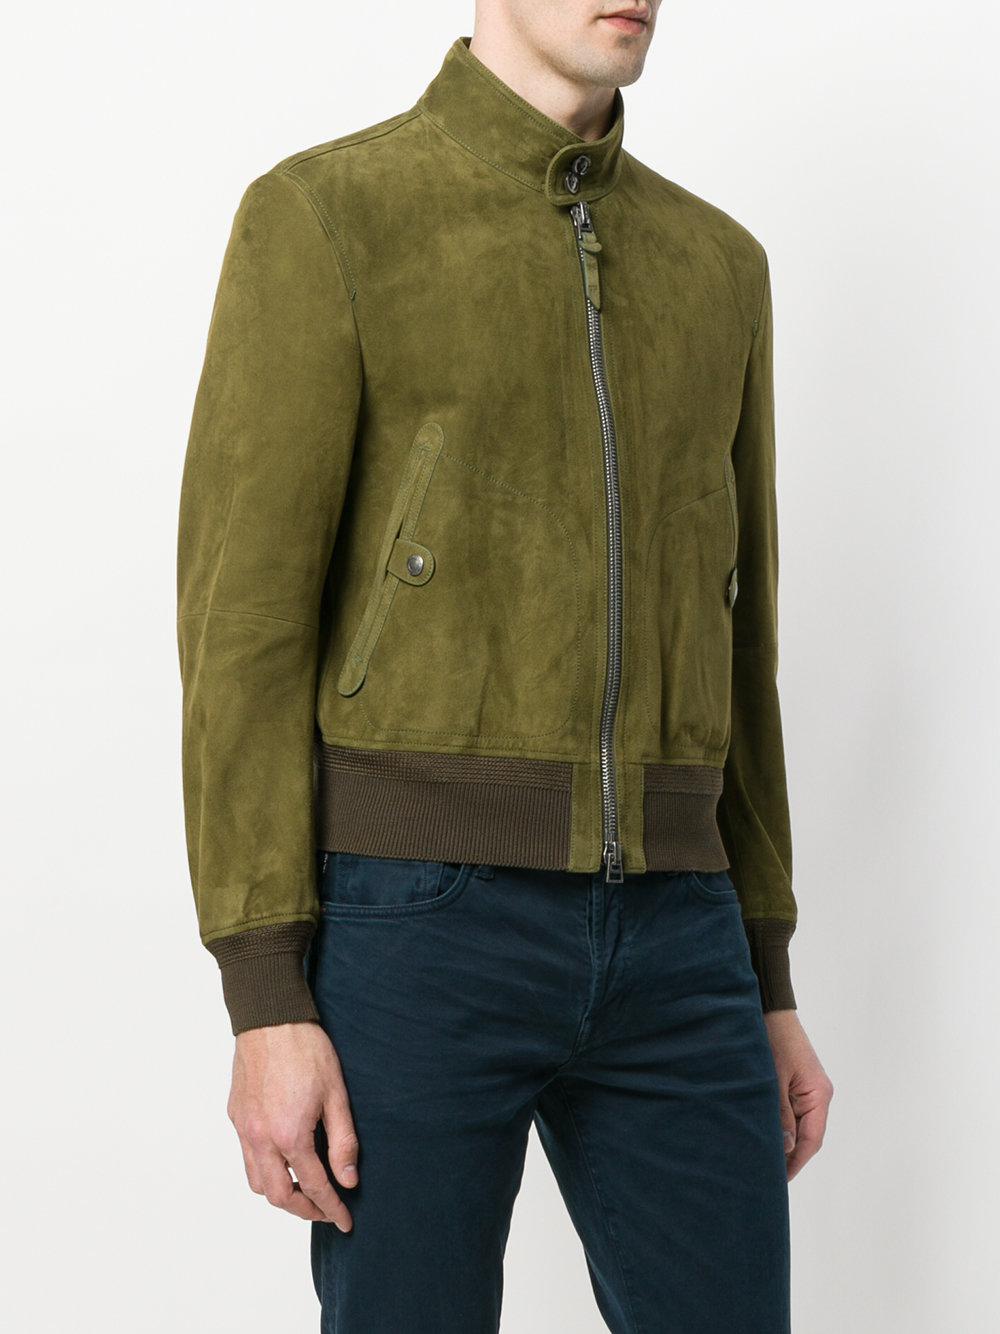 Lyst - Tom Ford Suede Bomber Jacket in Green for Men